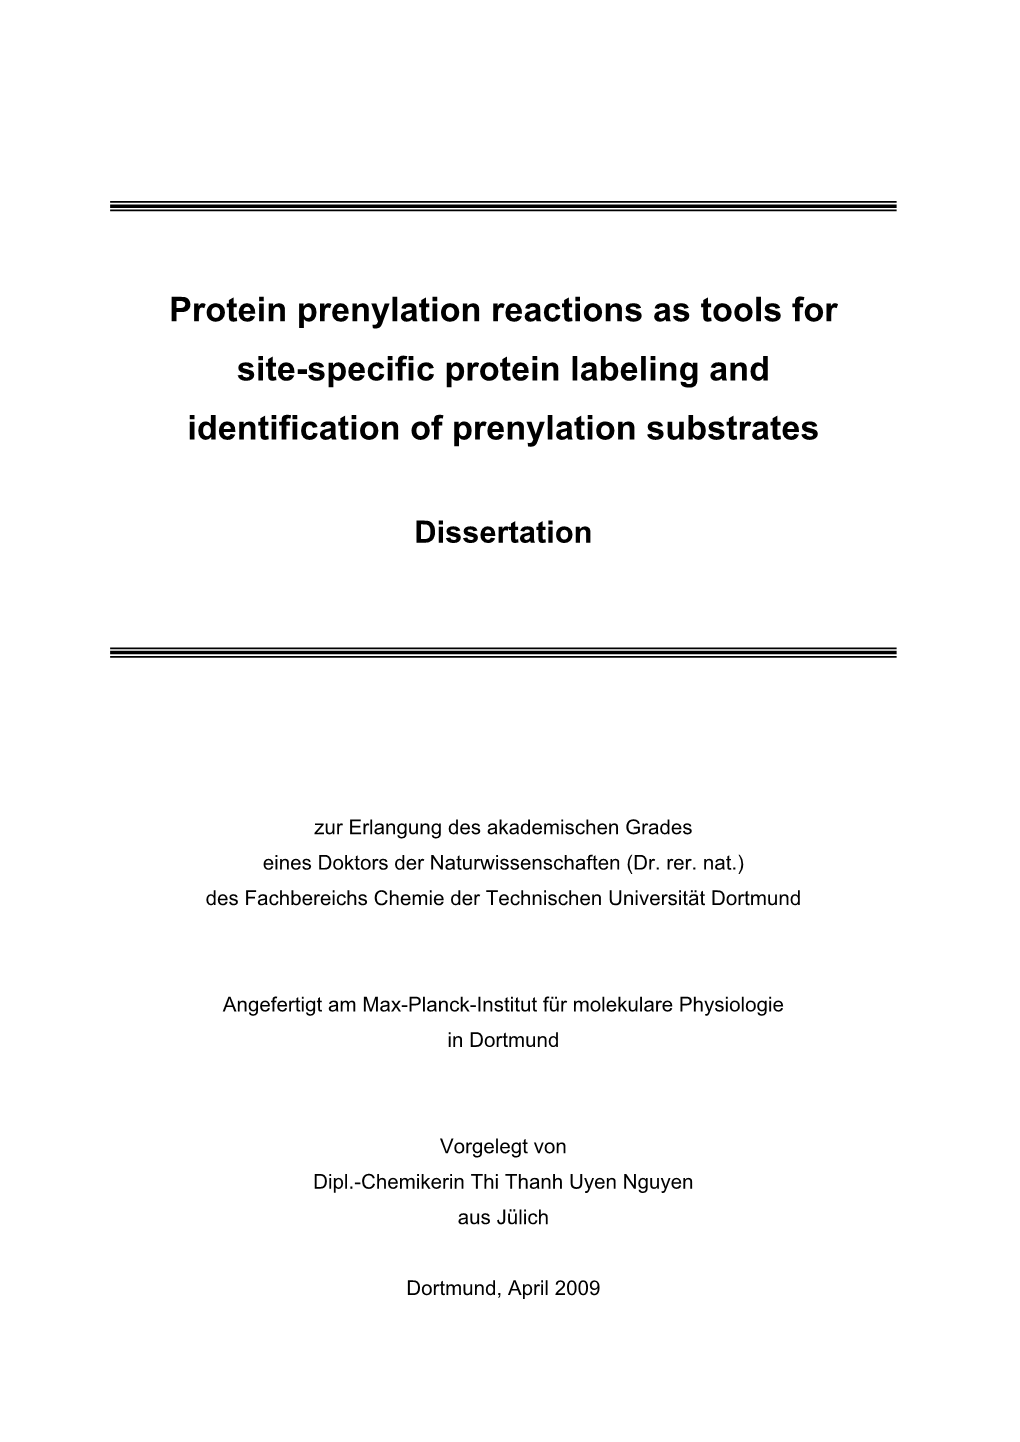 Protein Prenylation Reactions As Tools for Site-Specific Protein Labeling and Identification of Prenylation Substrates